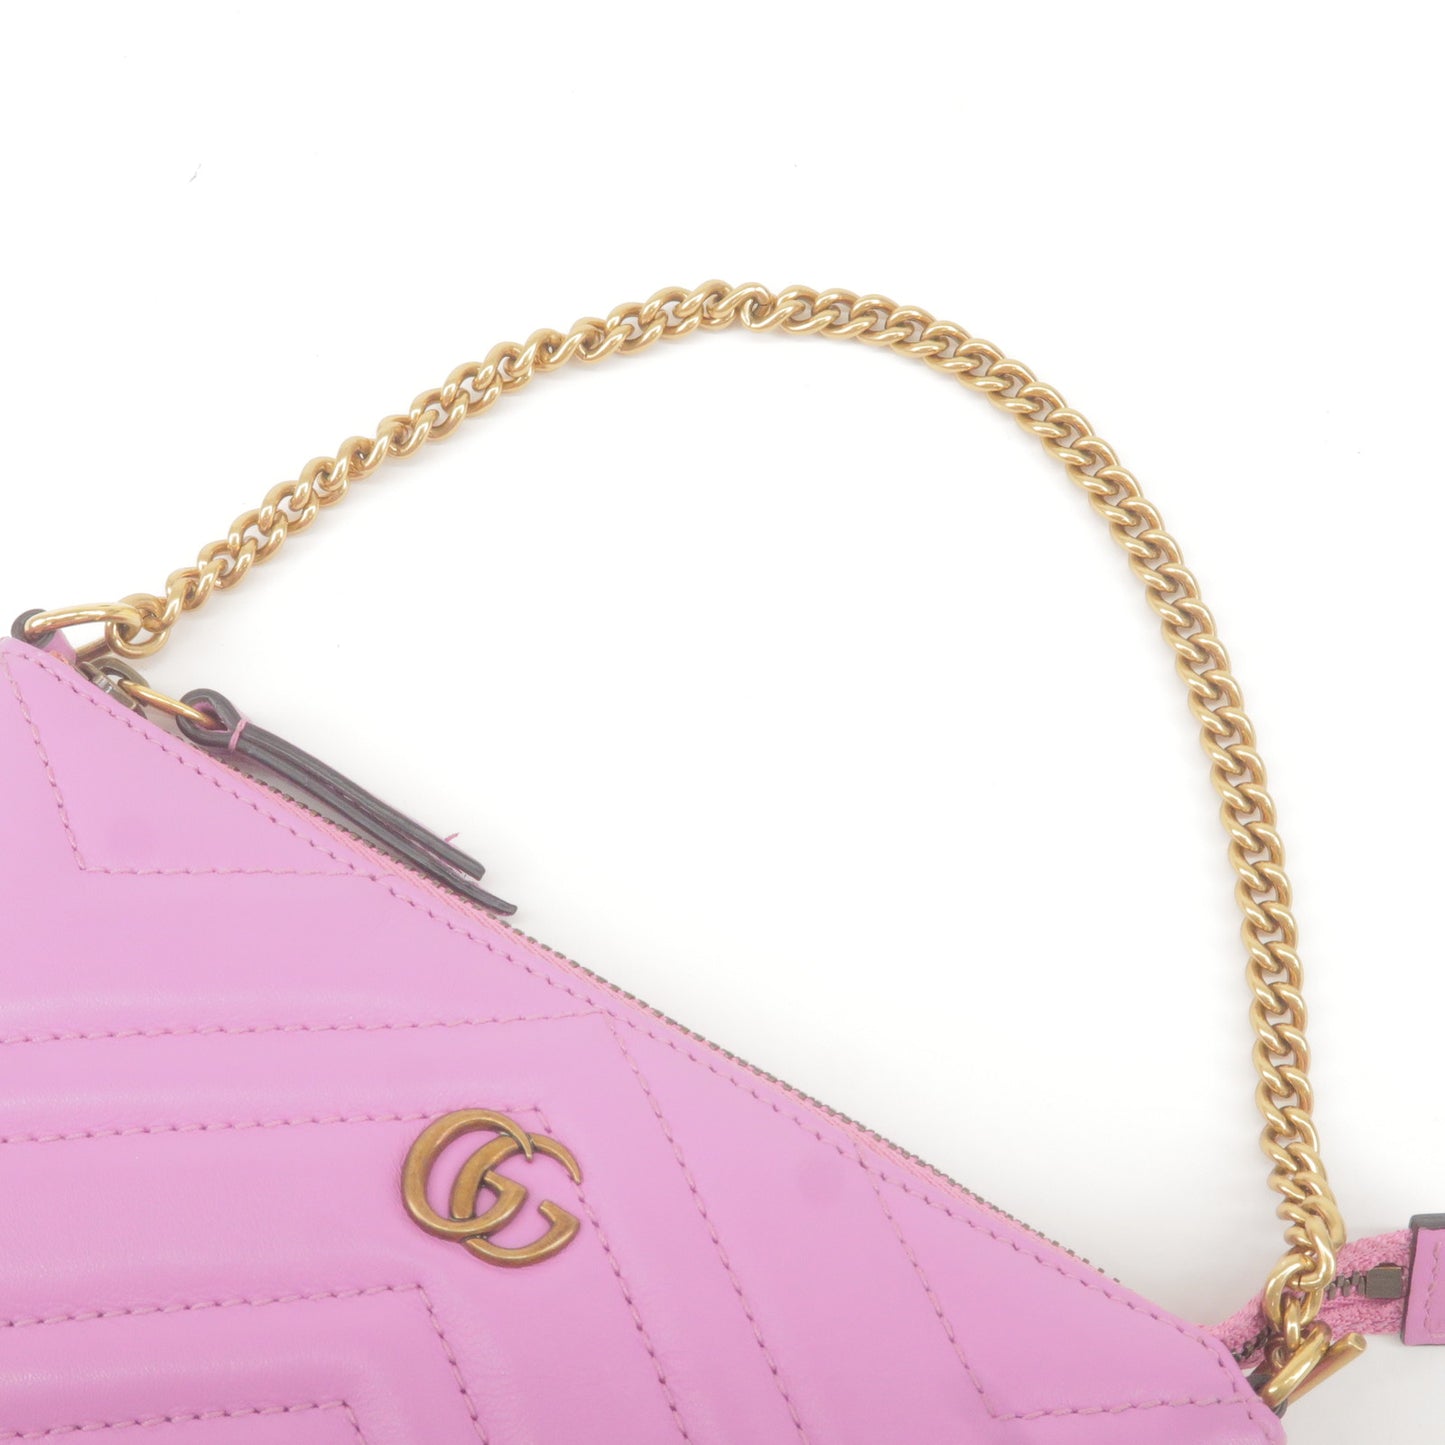 GUCCI GG Marmont Leather Chain Pouch Hand Bag Purse Pink 443129